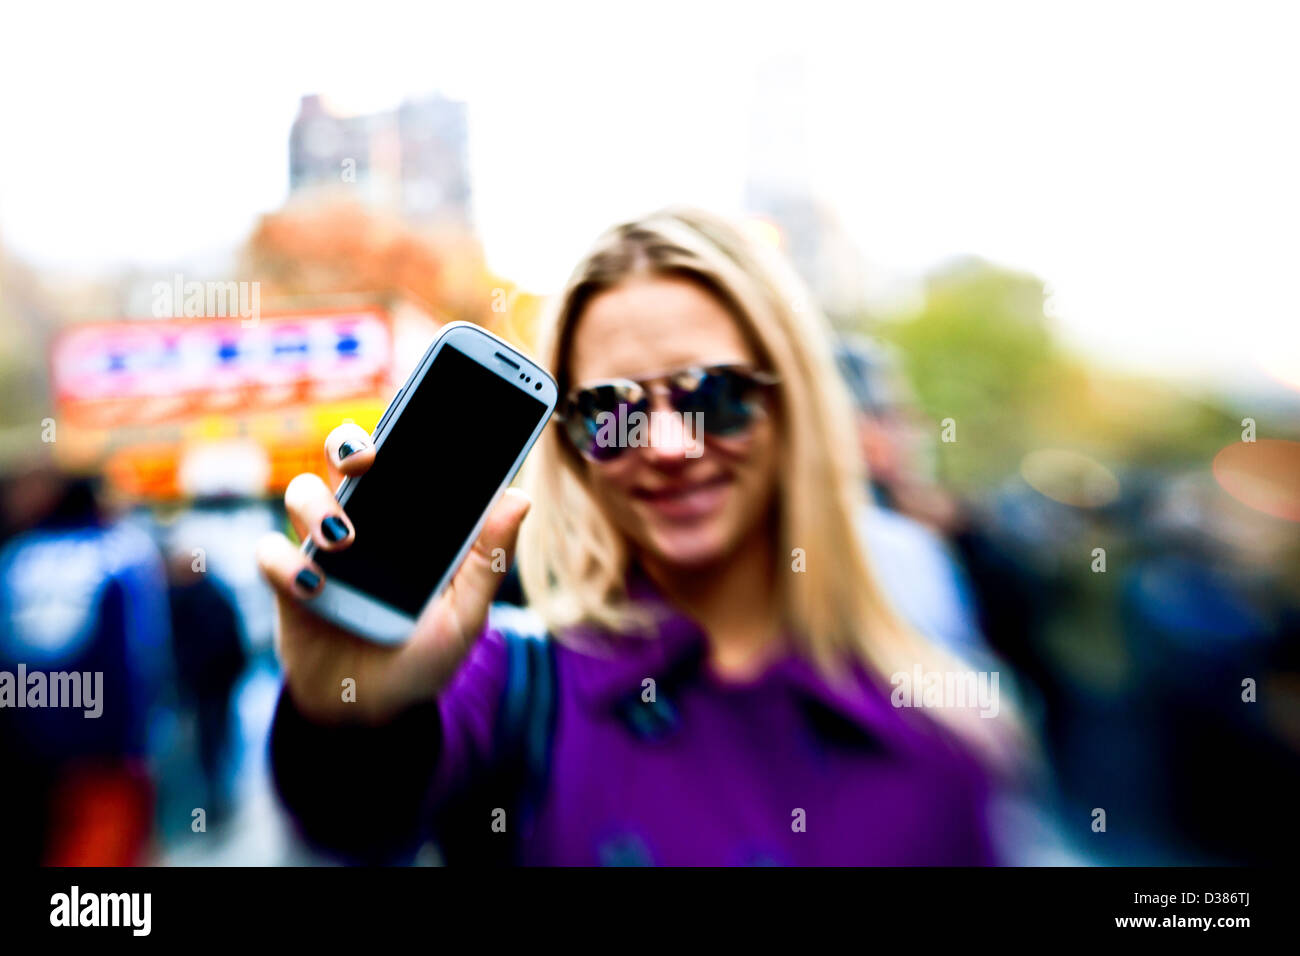 Young Woman getting ready to use her phone at a street fair Stock Photo